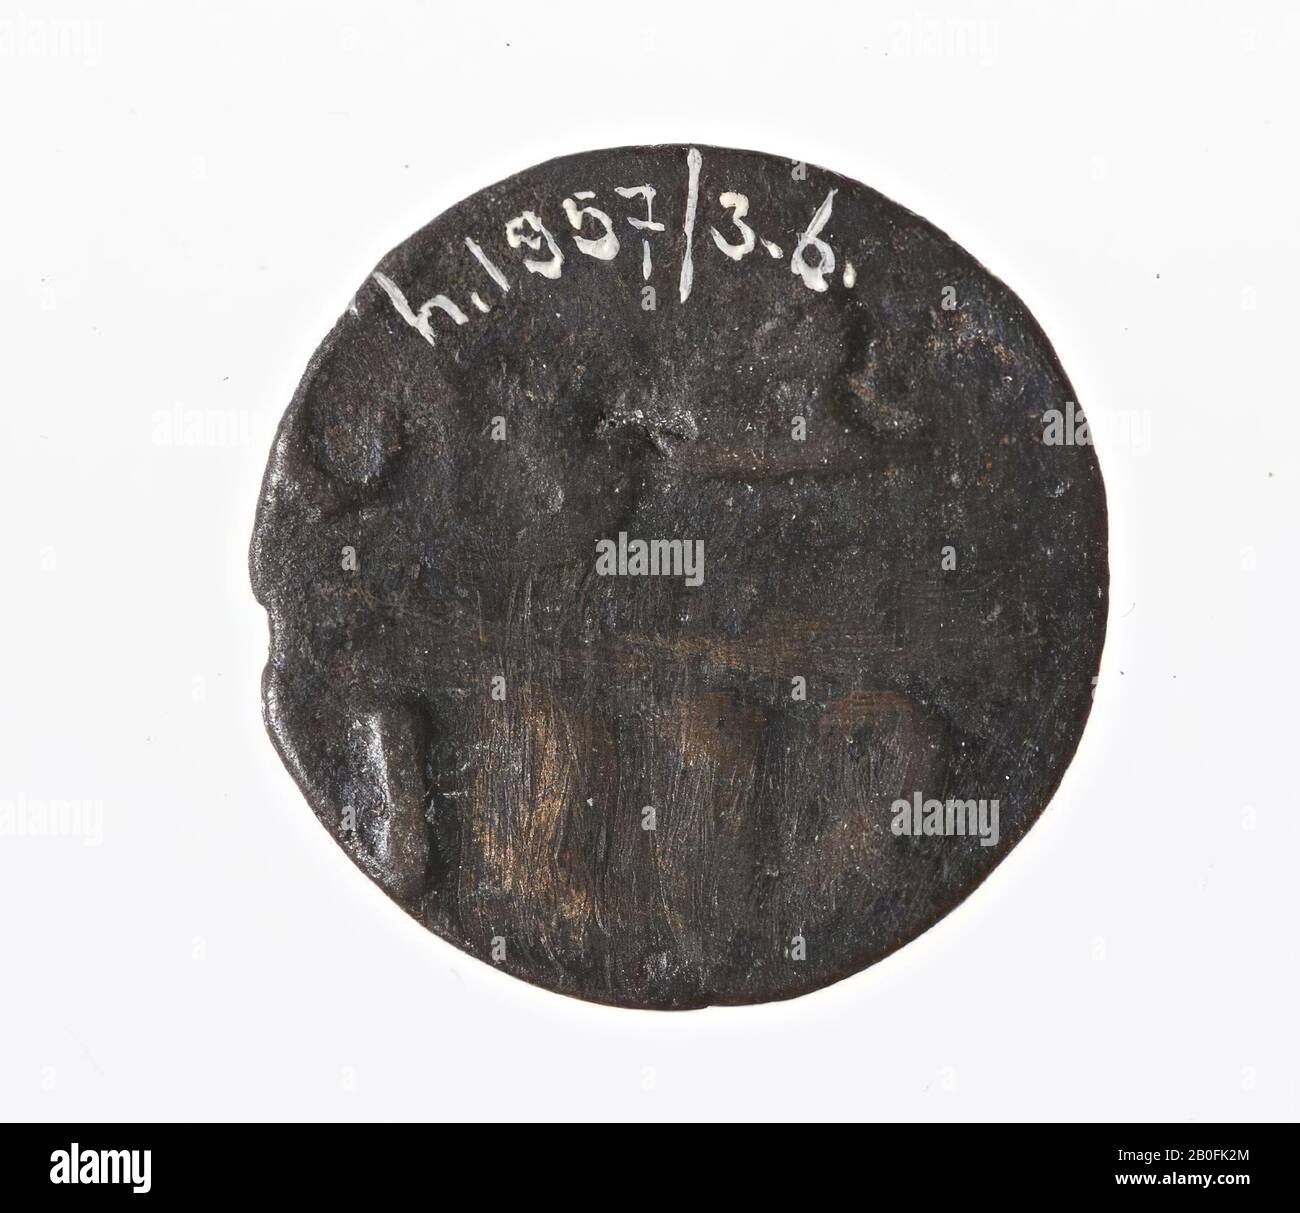 Bronze disc with two equilateral triangles (Star of David). At the back the year 1212 (about 1800 A.D.) and among others the letter A., coin, Falus, Morocco, metal, copper, ntb 1800-1900, Netherlands, Utrecht, Vianen, Vianen Stock Photo